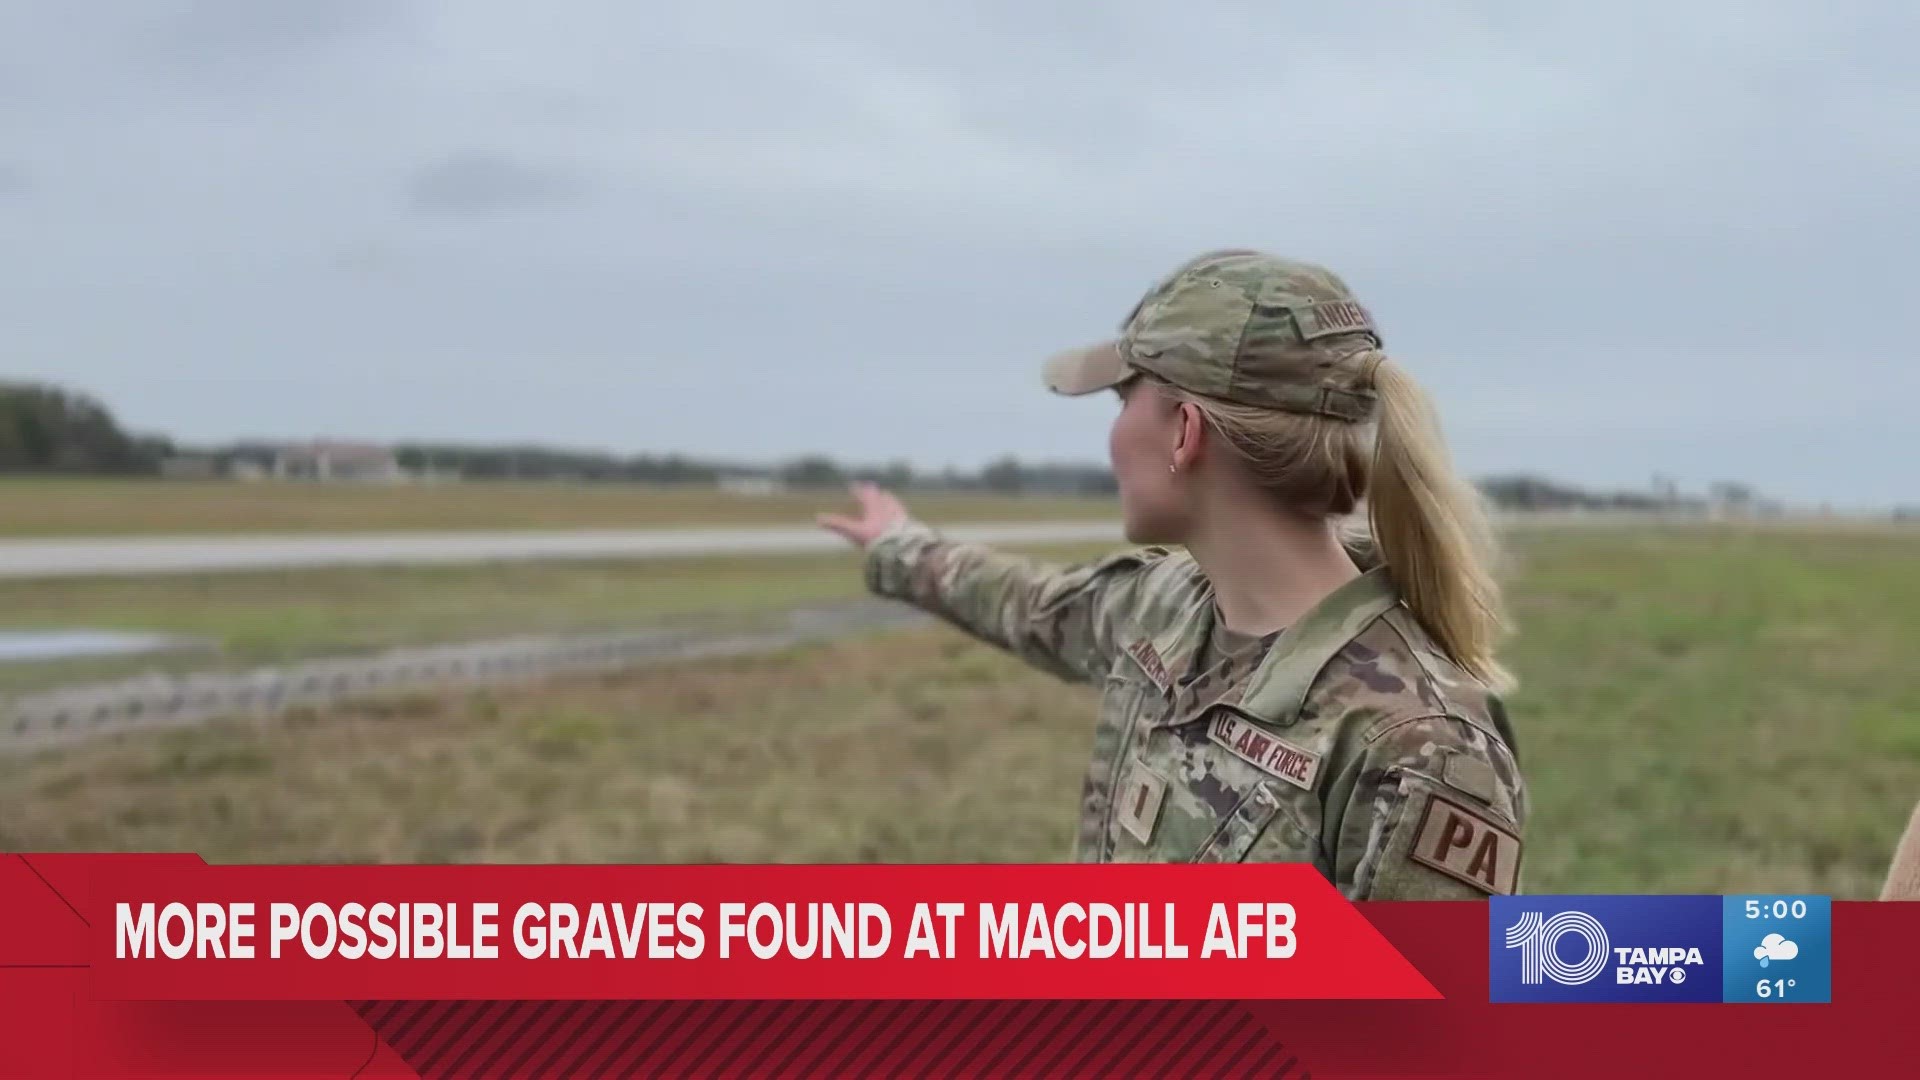 The base began a formal investigation and search for the graves in 2019.